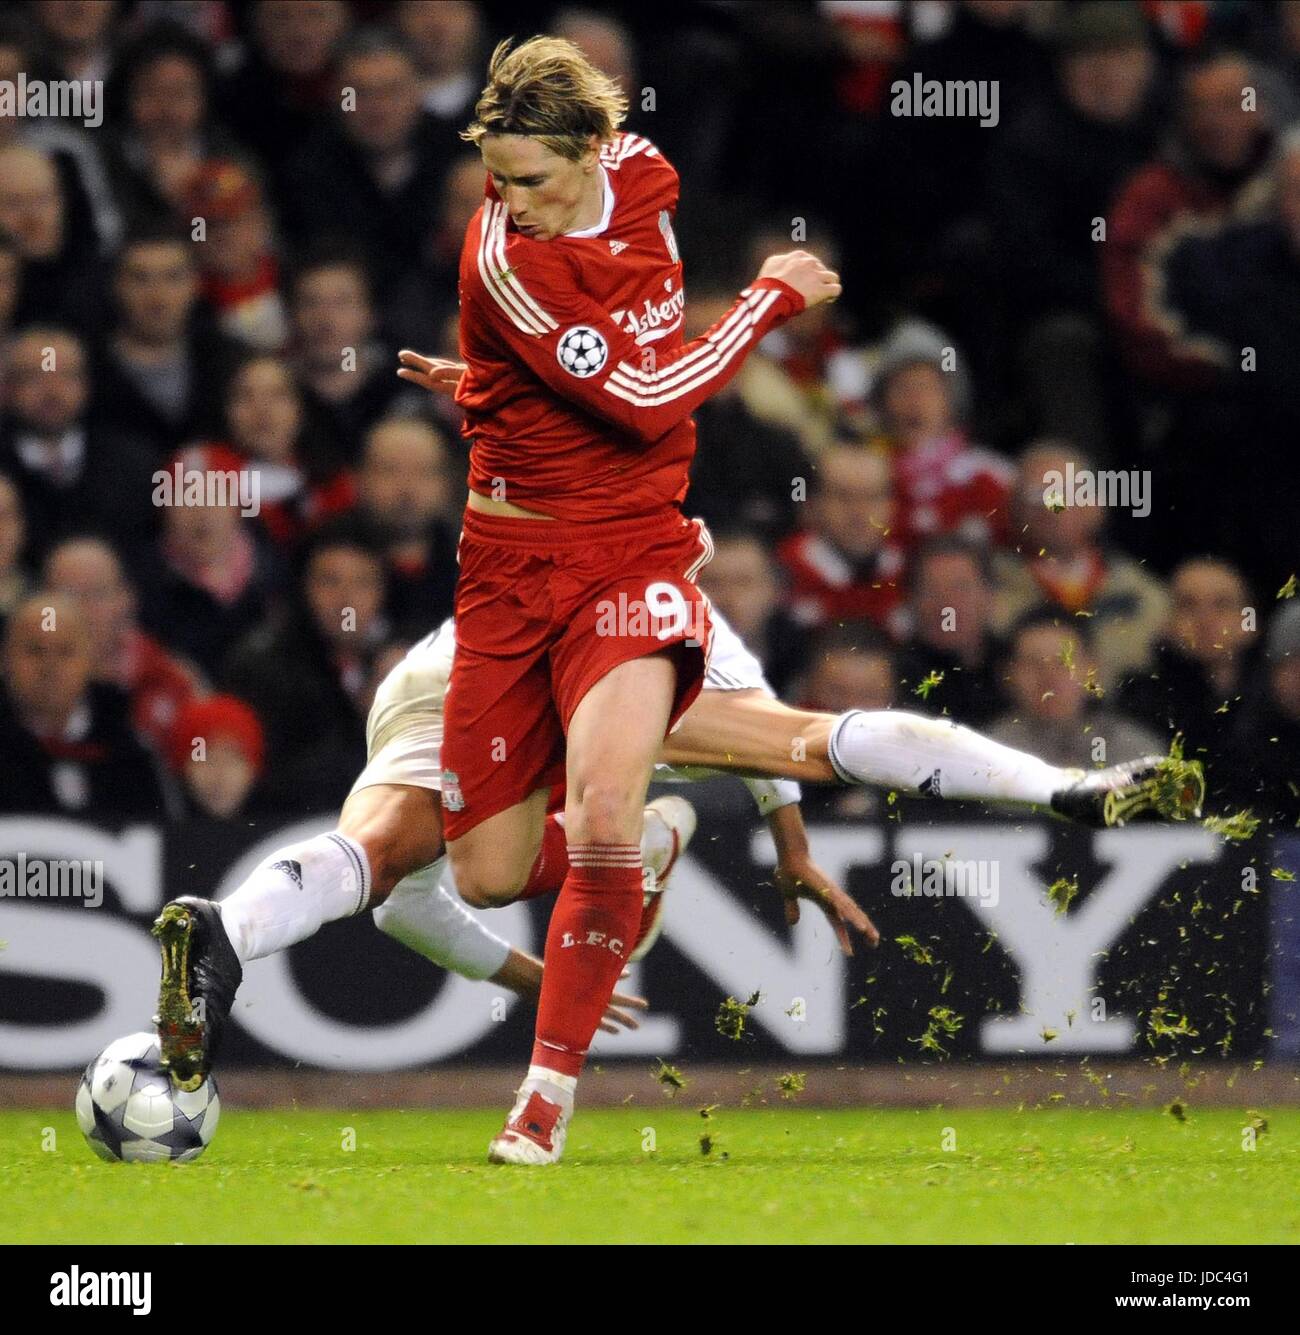 GABRIEL HEINZE FERNANDO TORRES LIVERPOOL V REAL MADRID ANFIELD LIVERPOOL ENGLAND 10 March 2009 Stock Photo